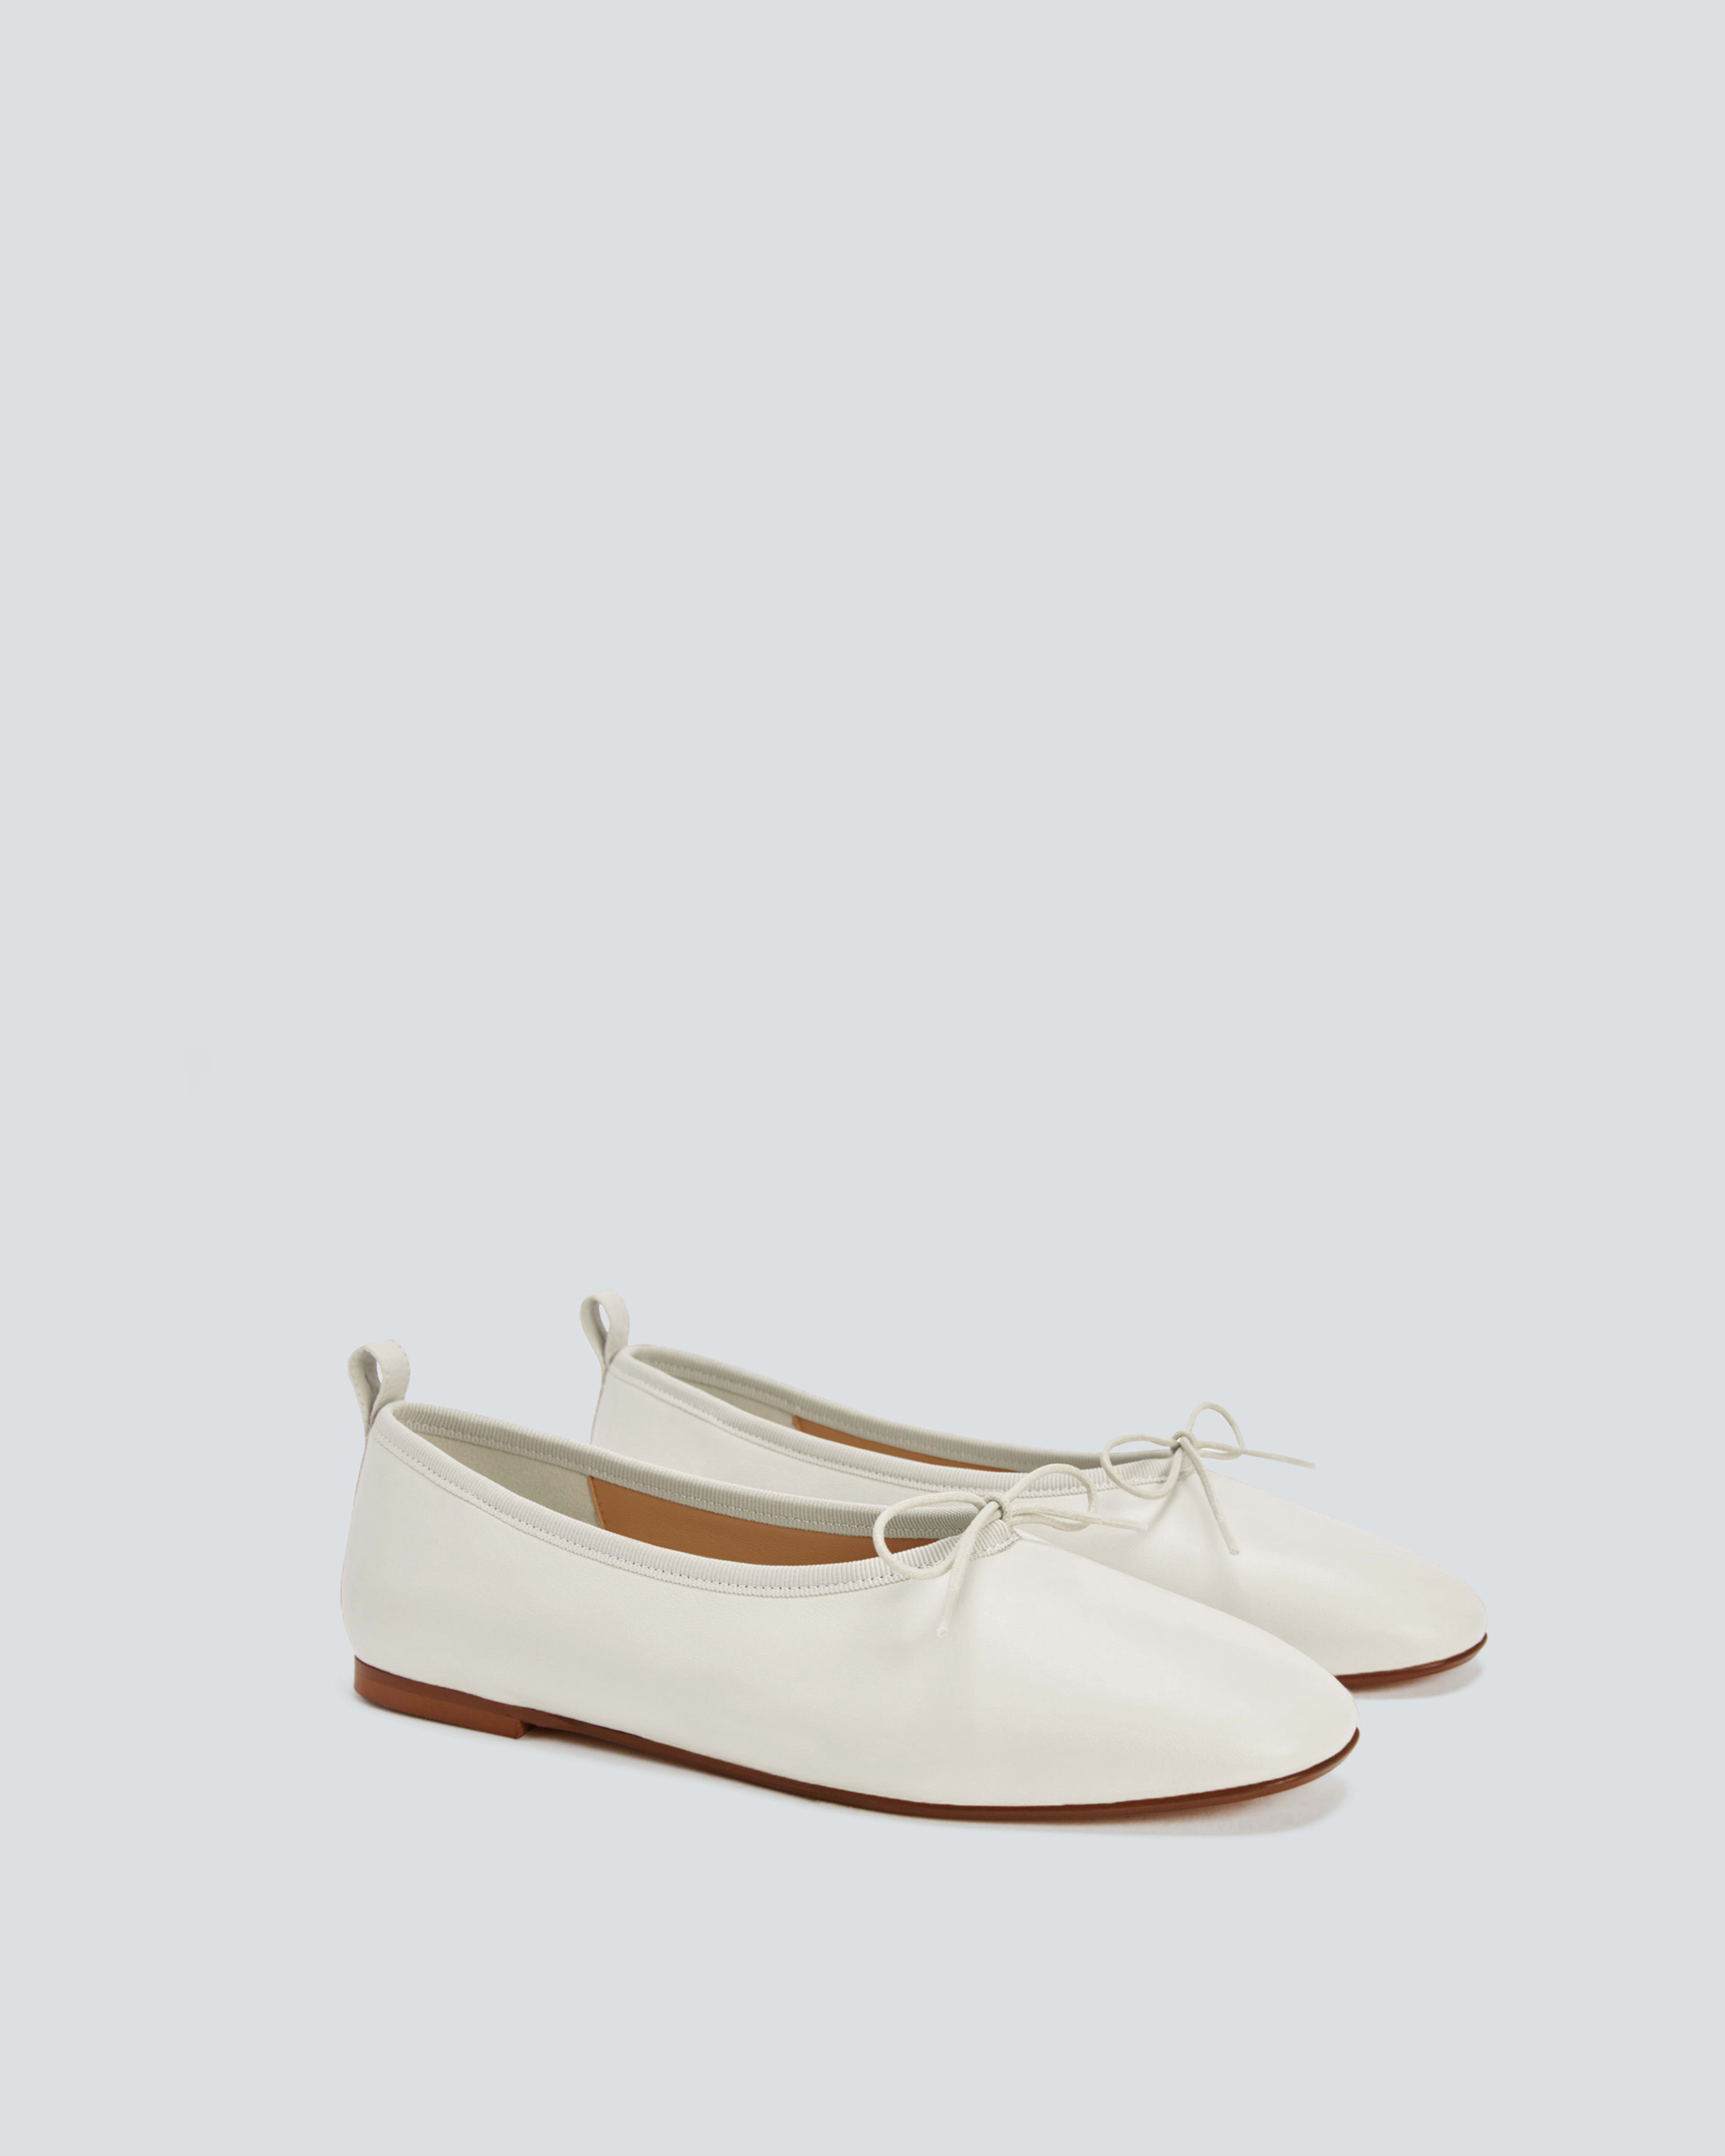 Women's Shoes - Sandals, Boots, Sneakers & Flats – Everlane